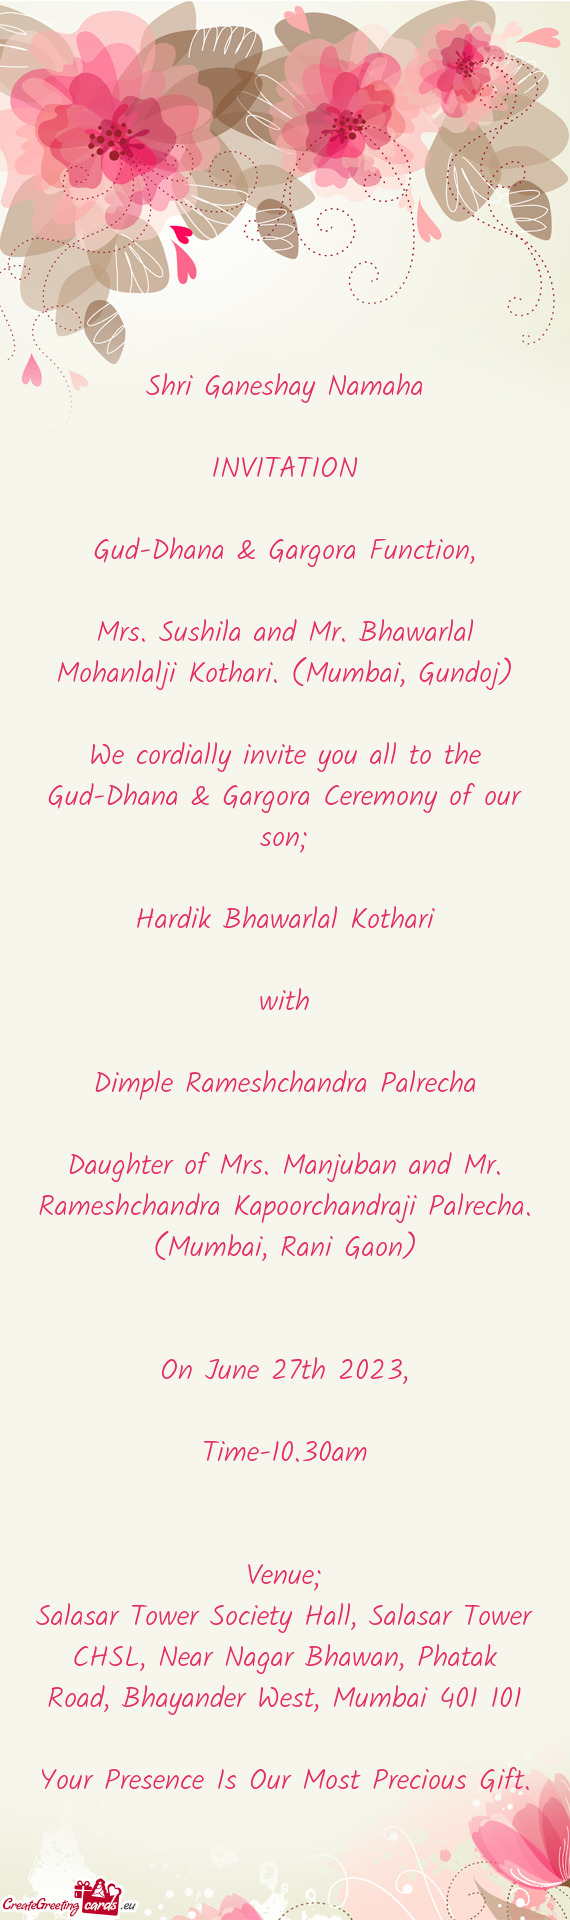 We cordially invite you all to the Gud-Dhana & Gargora Ceremony of our son;